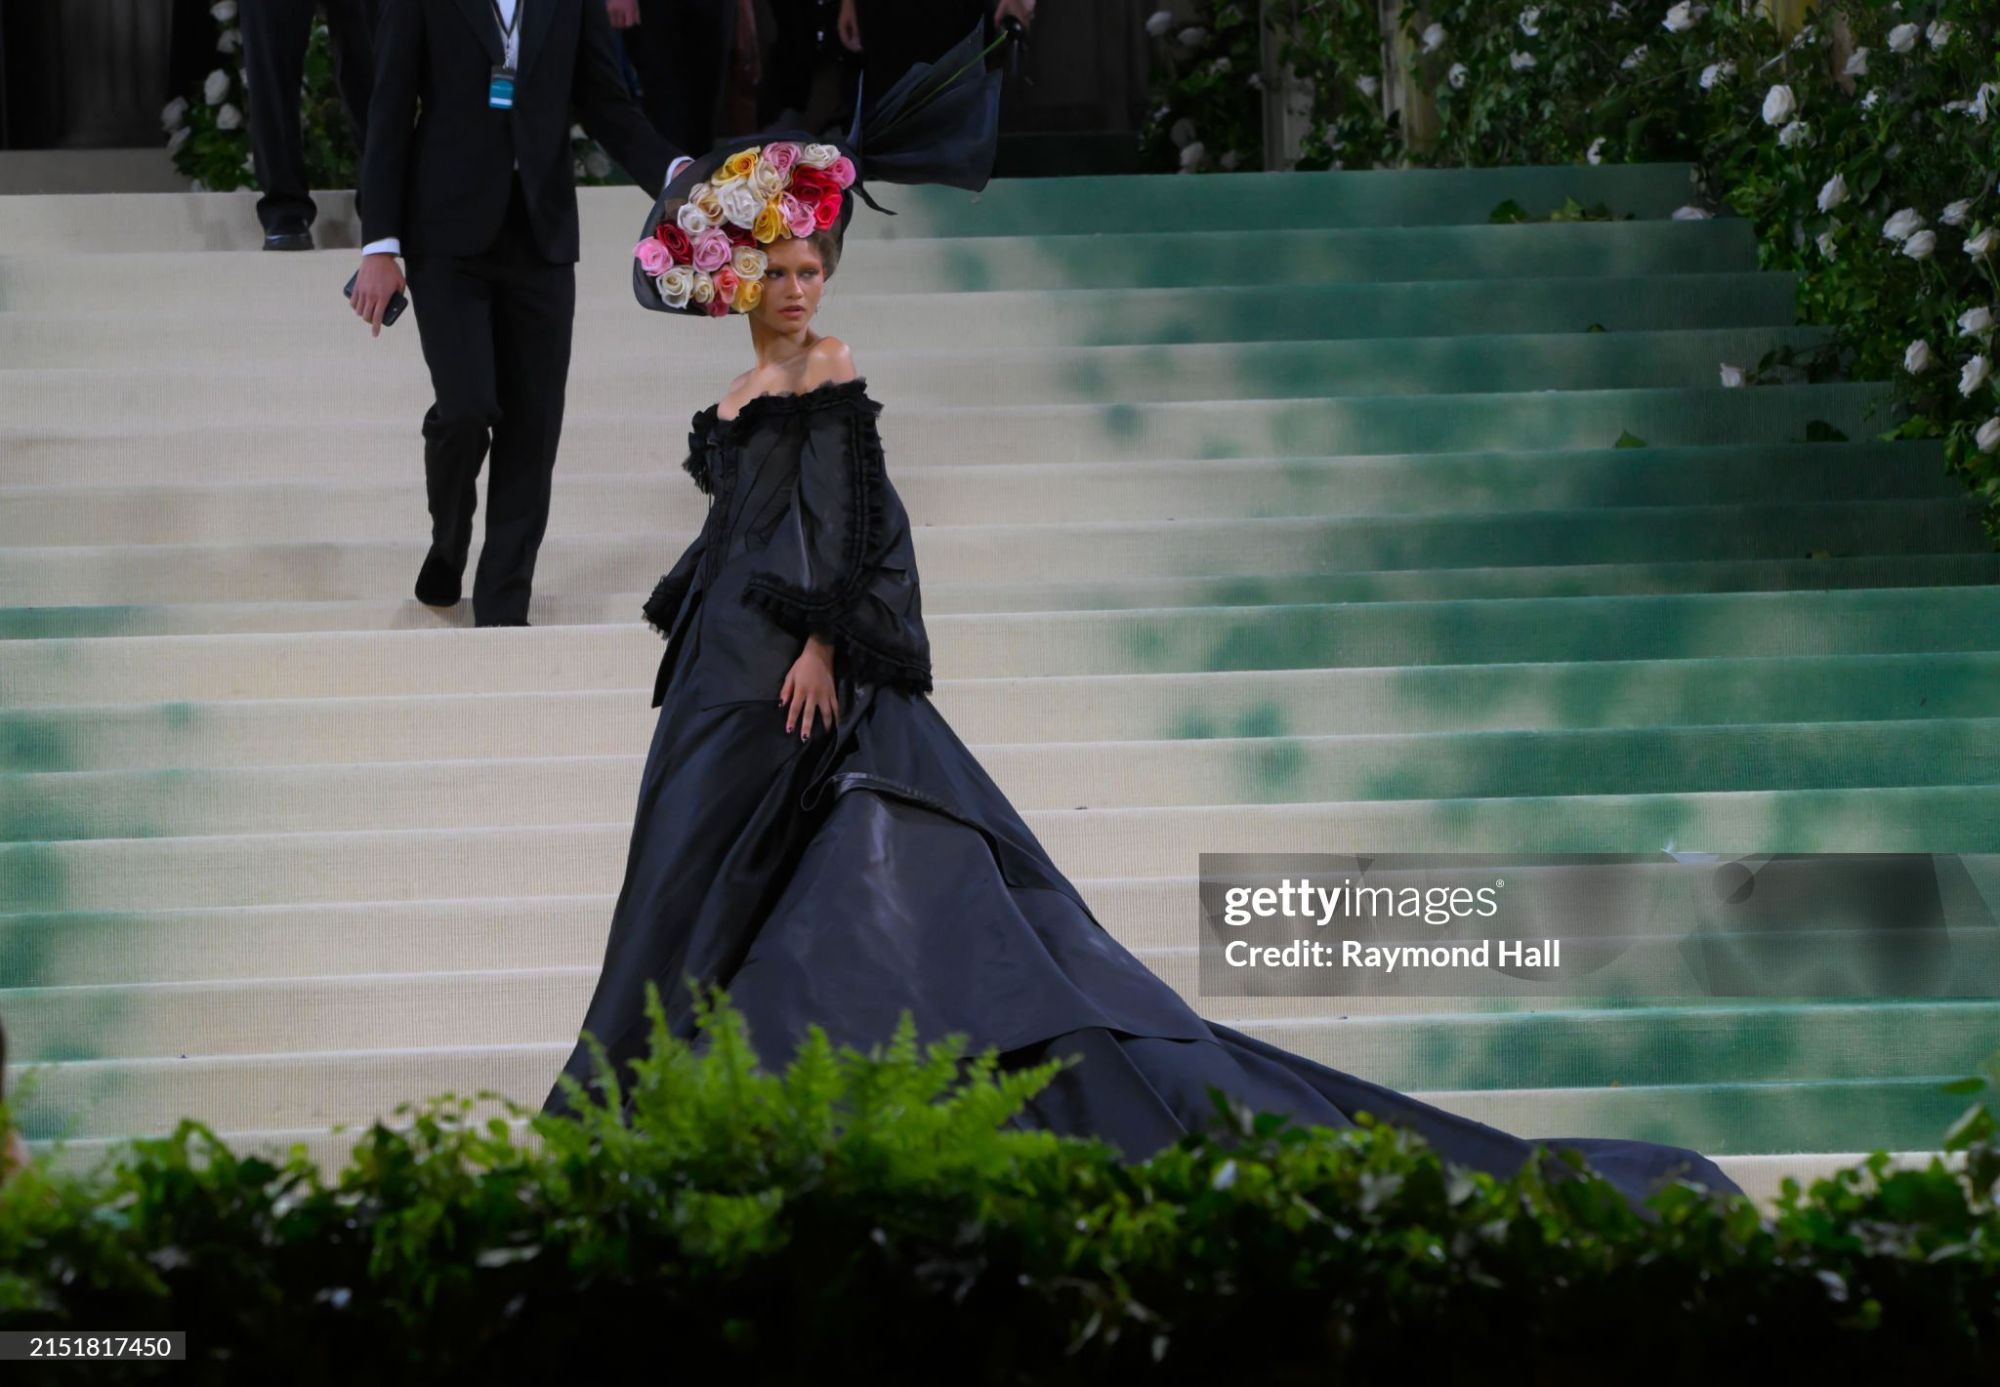 gettyimages-2151817450-2048x2048.jpg